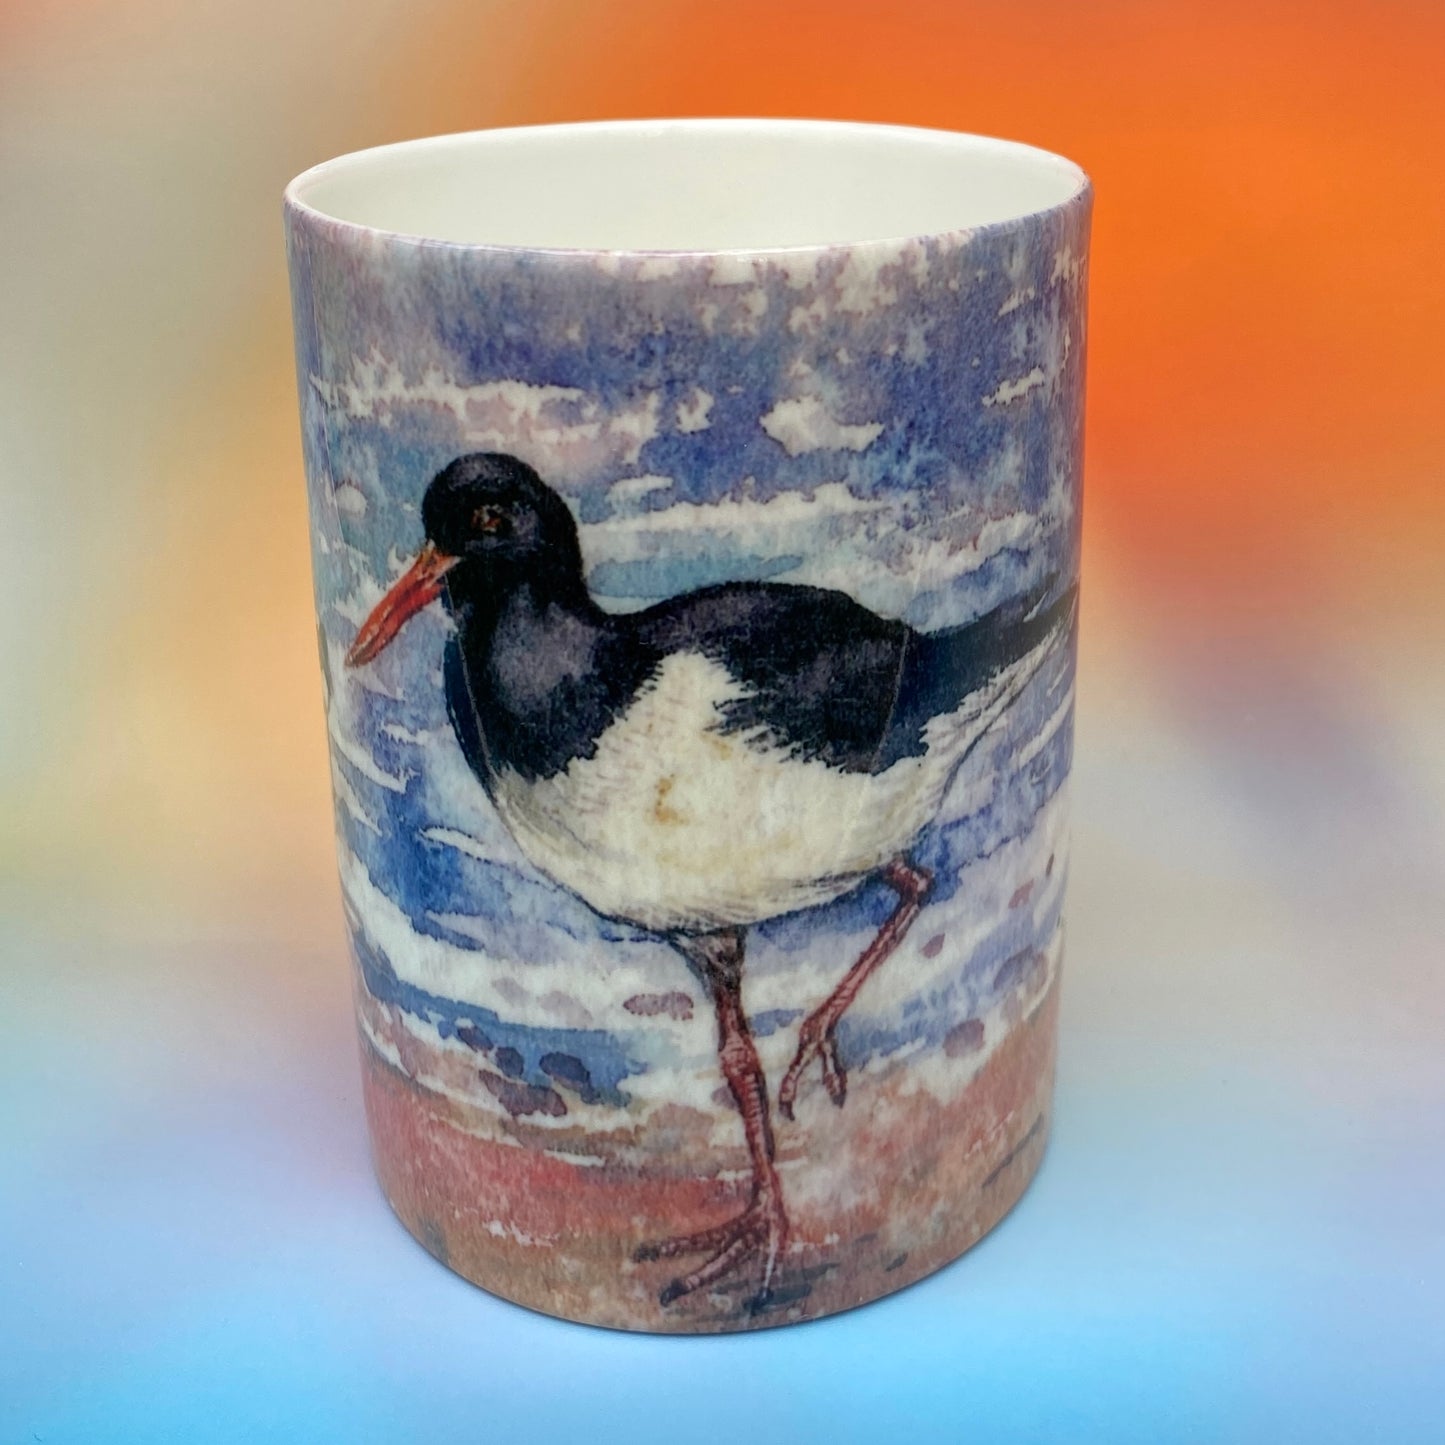 A mug with a oystercathers design by Orkney artist Jane Glue, Scotland